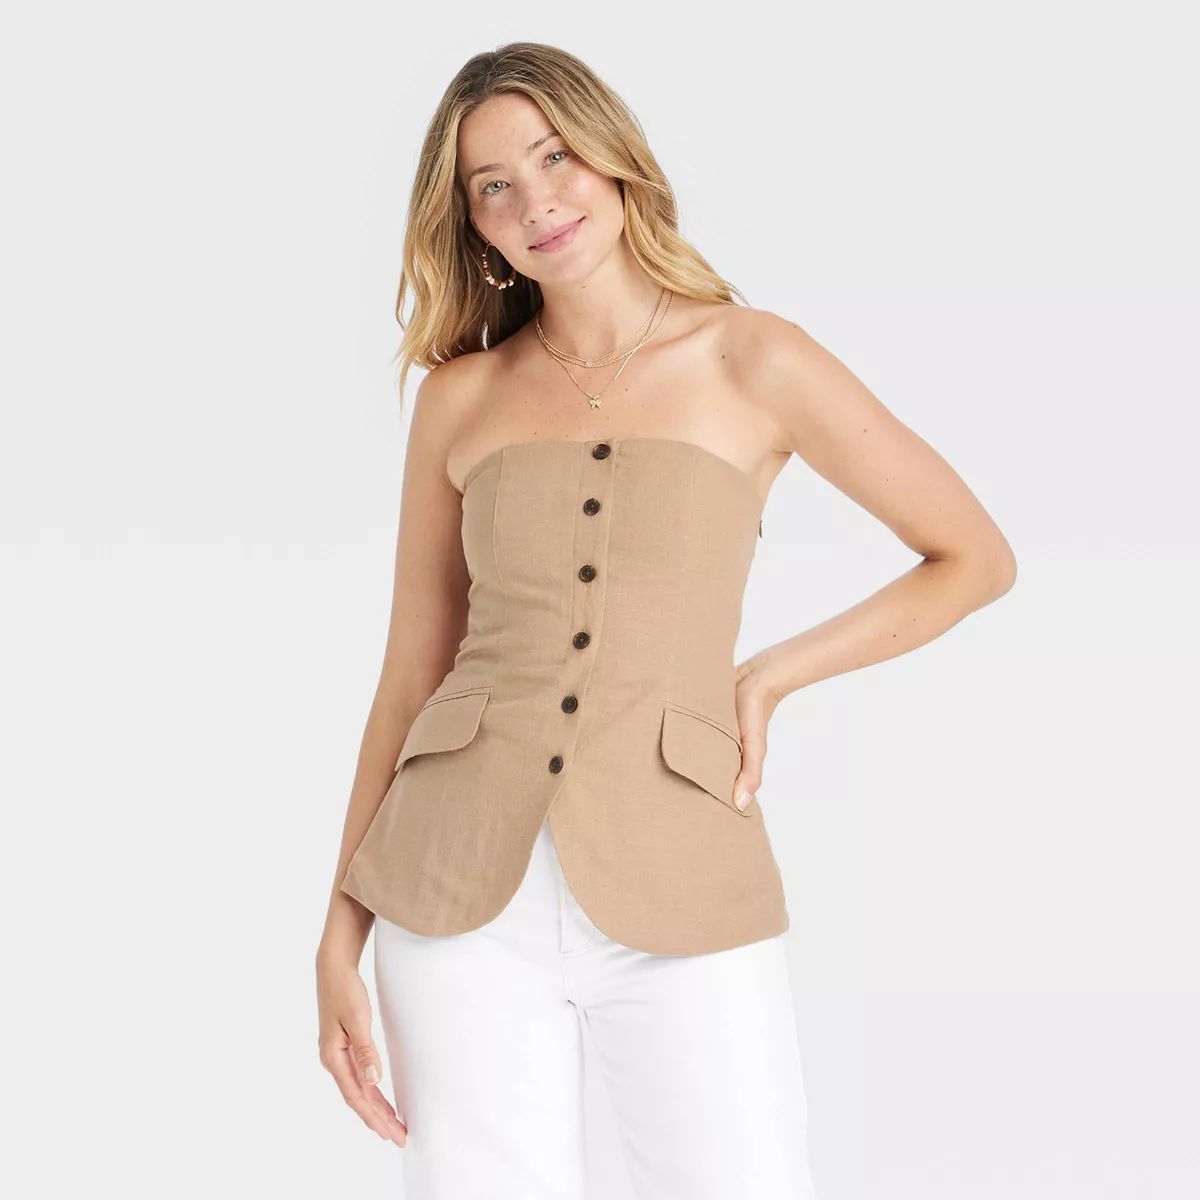 TargetClothing, Shoes & AccessoriesWomen’s ClothingTopsShirts & Blouses | Target